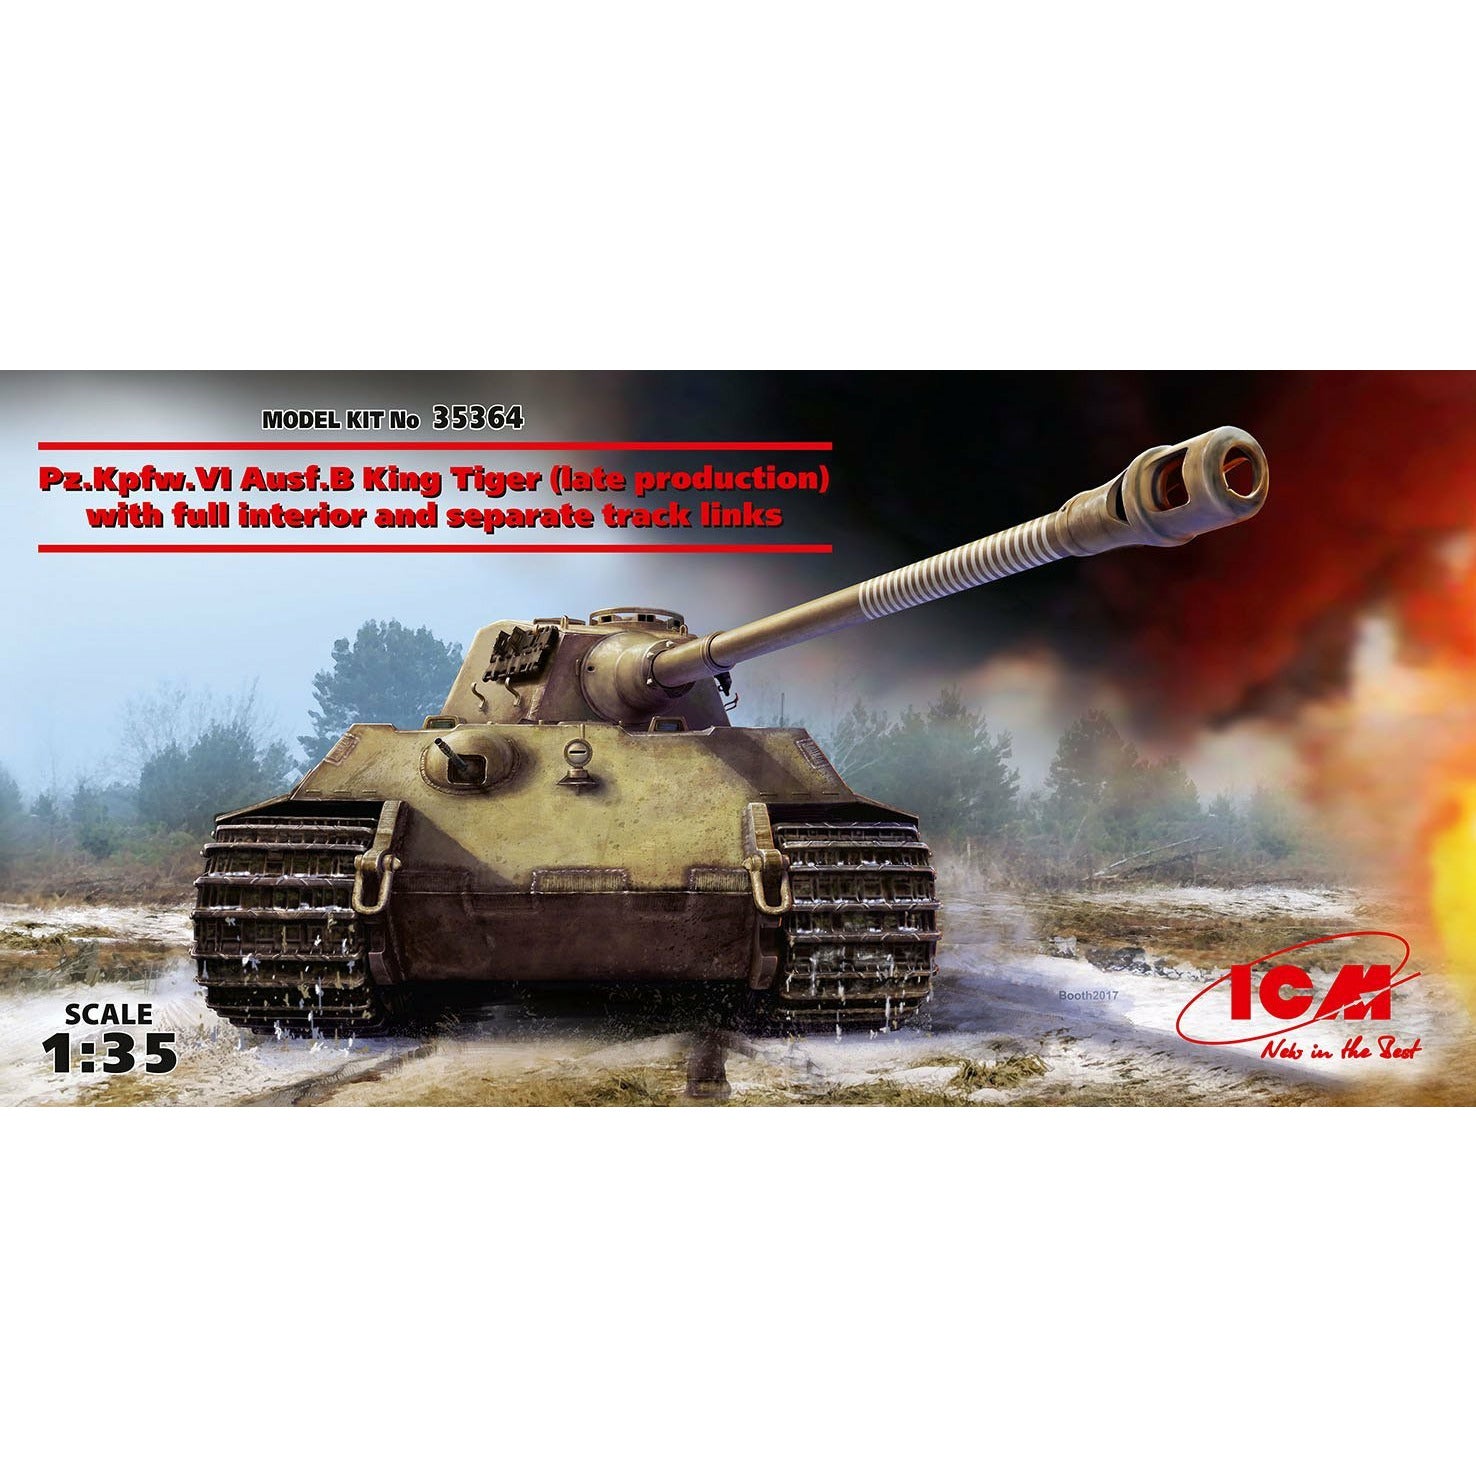 Pz.Kpfw.VI Ausf.B King Tiger (late production) with full interior, WWII German Heavy Tank 1/35 #35364 by ICM